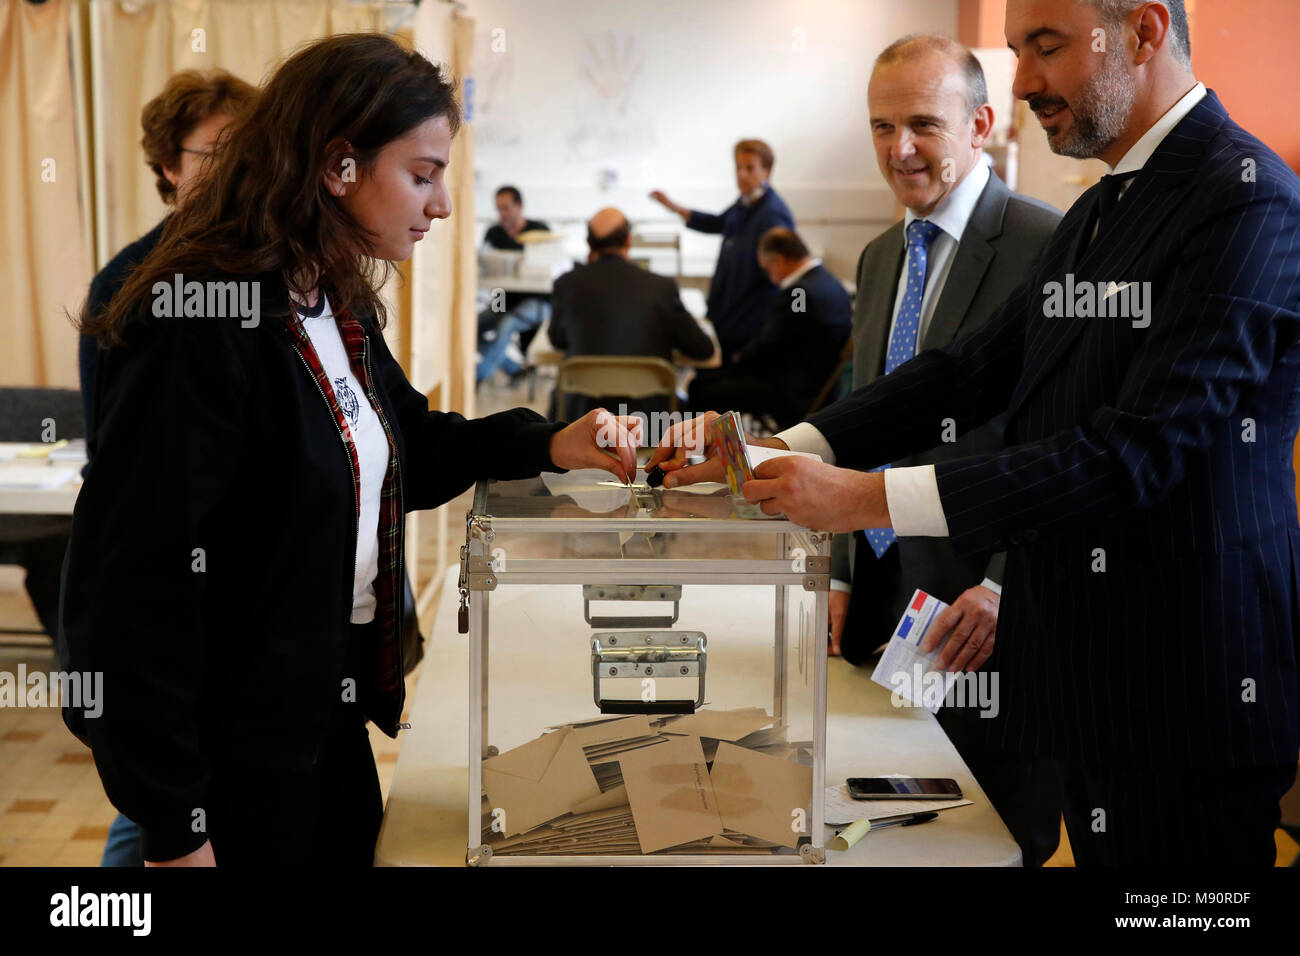 18-year-old woman's first vote in Montrouge, France. Stock Photo